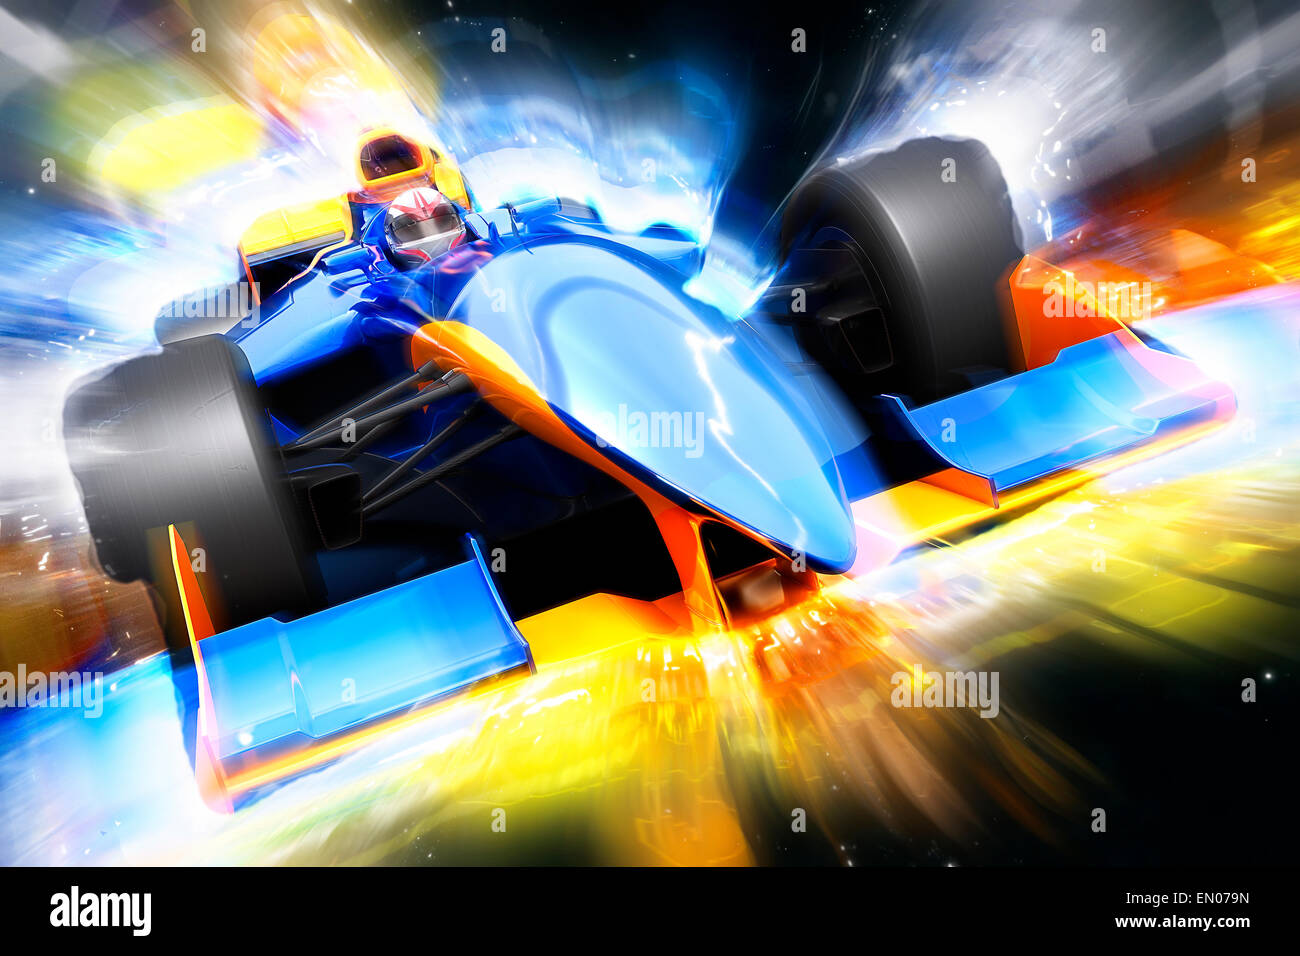 F1 bolide with light effect. Race car with no brand name is designed and modelled by myself Stock Photo